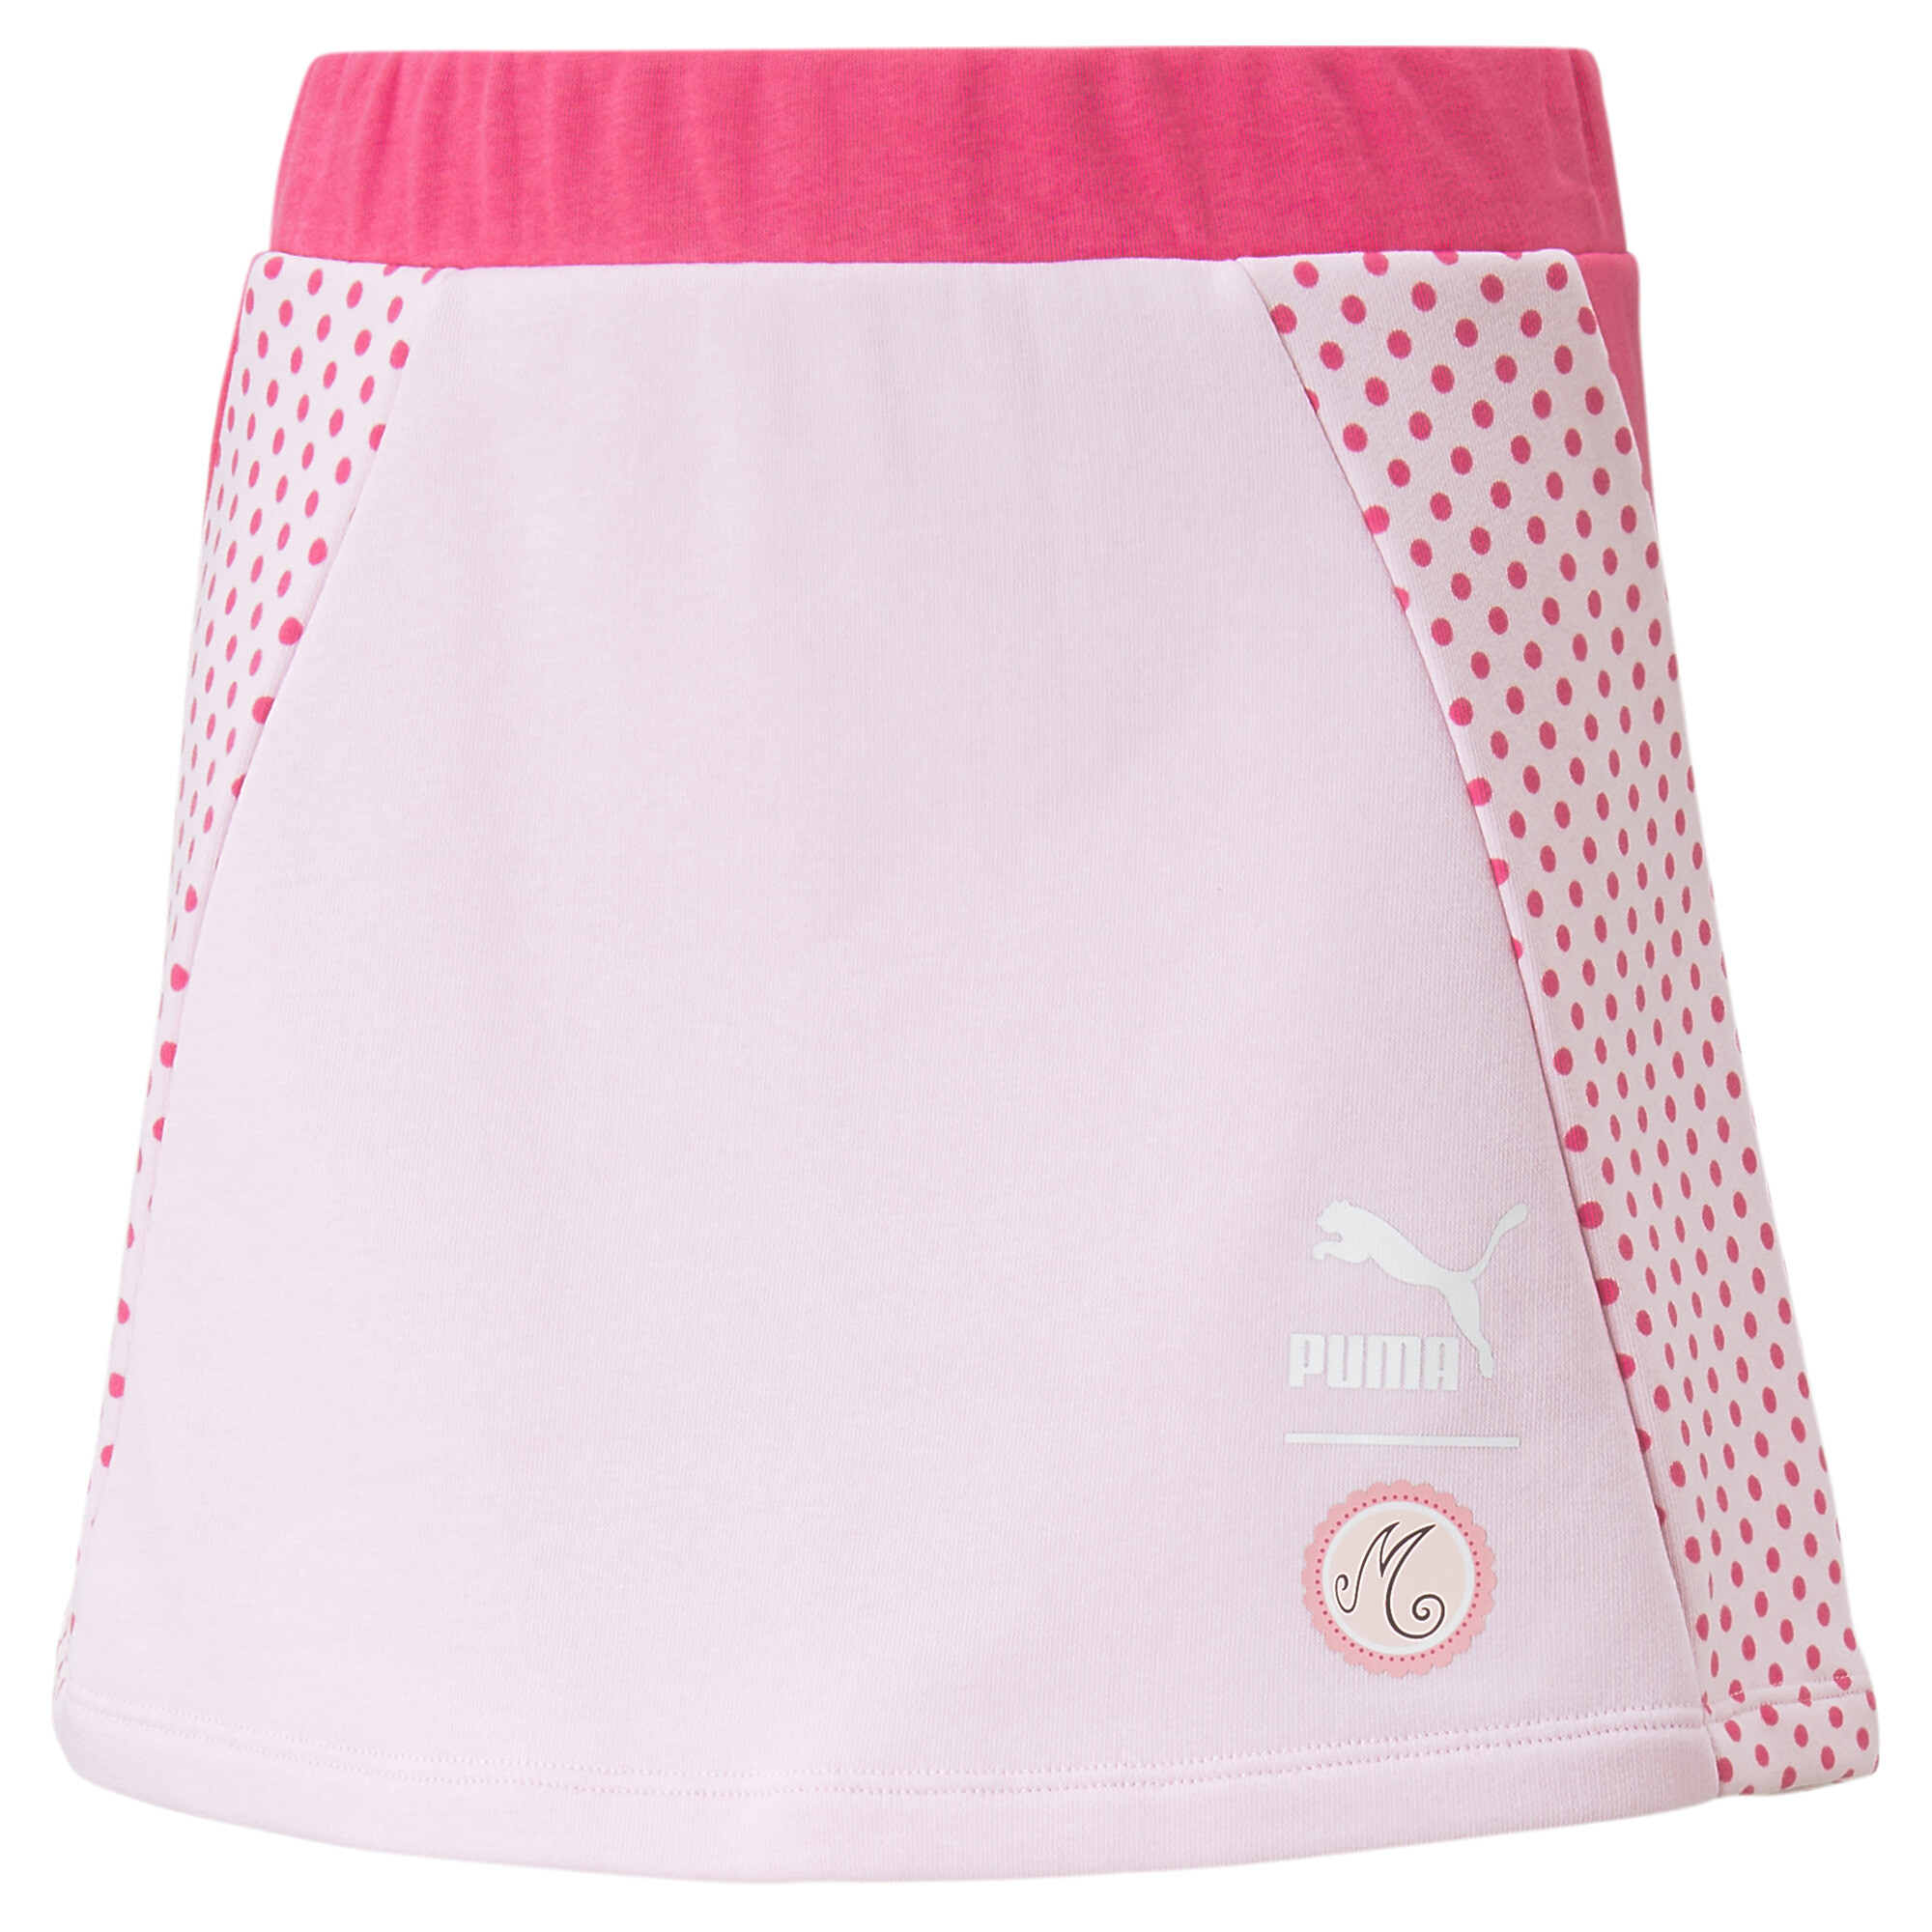 PUMA X MIRACULOUS Skirt In Pink, Size 13-14 Youth